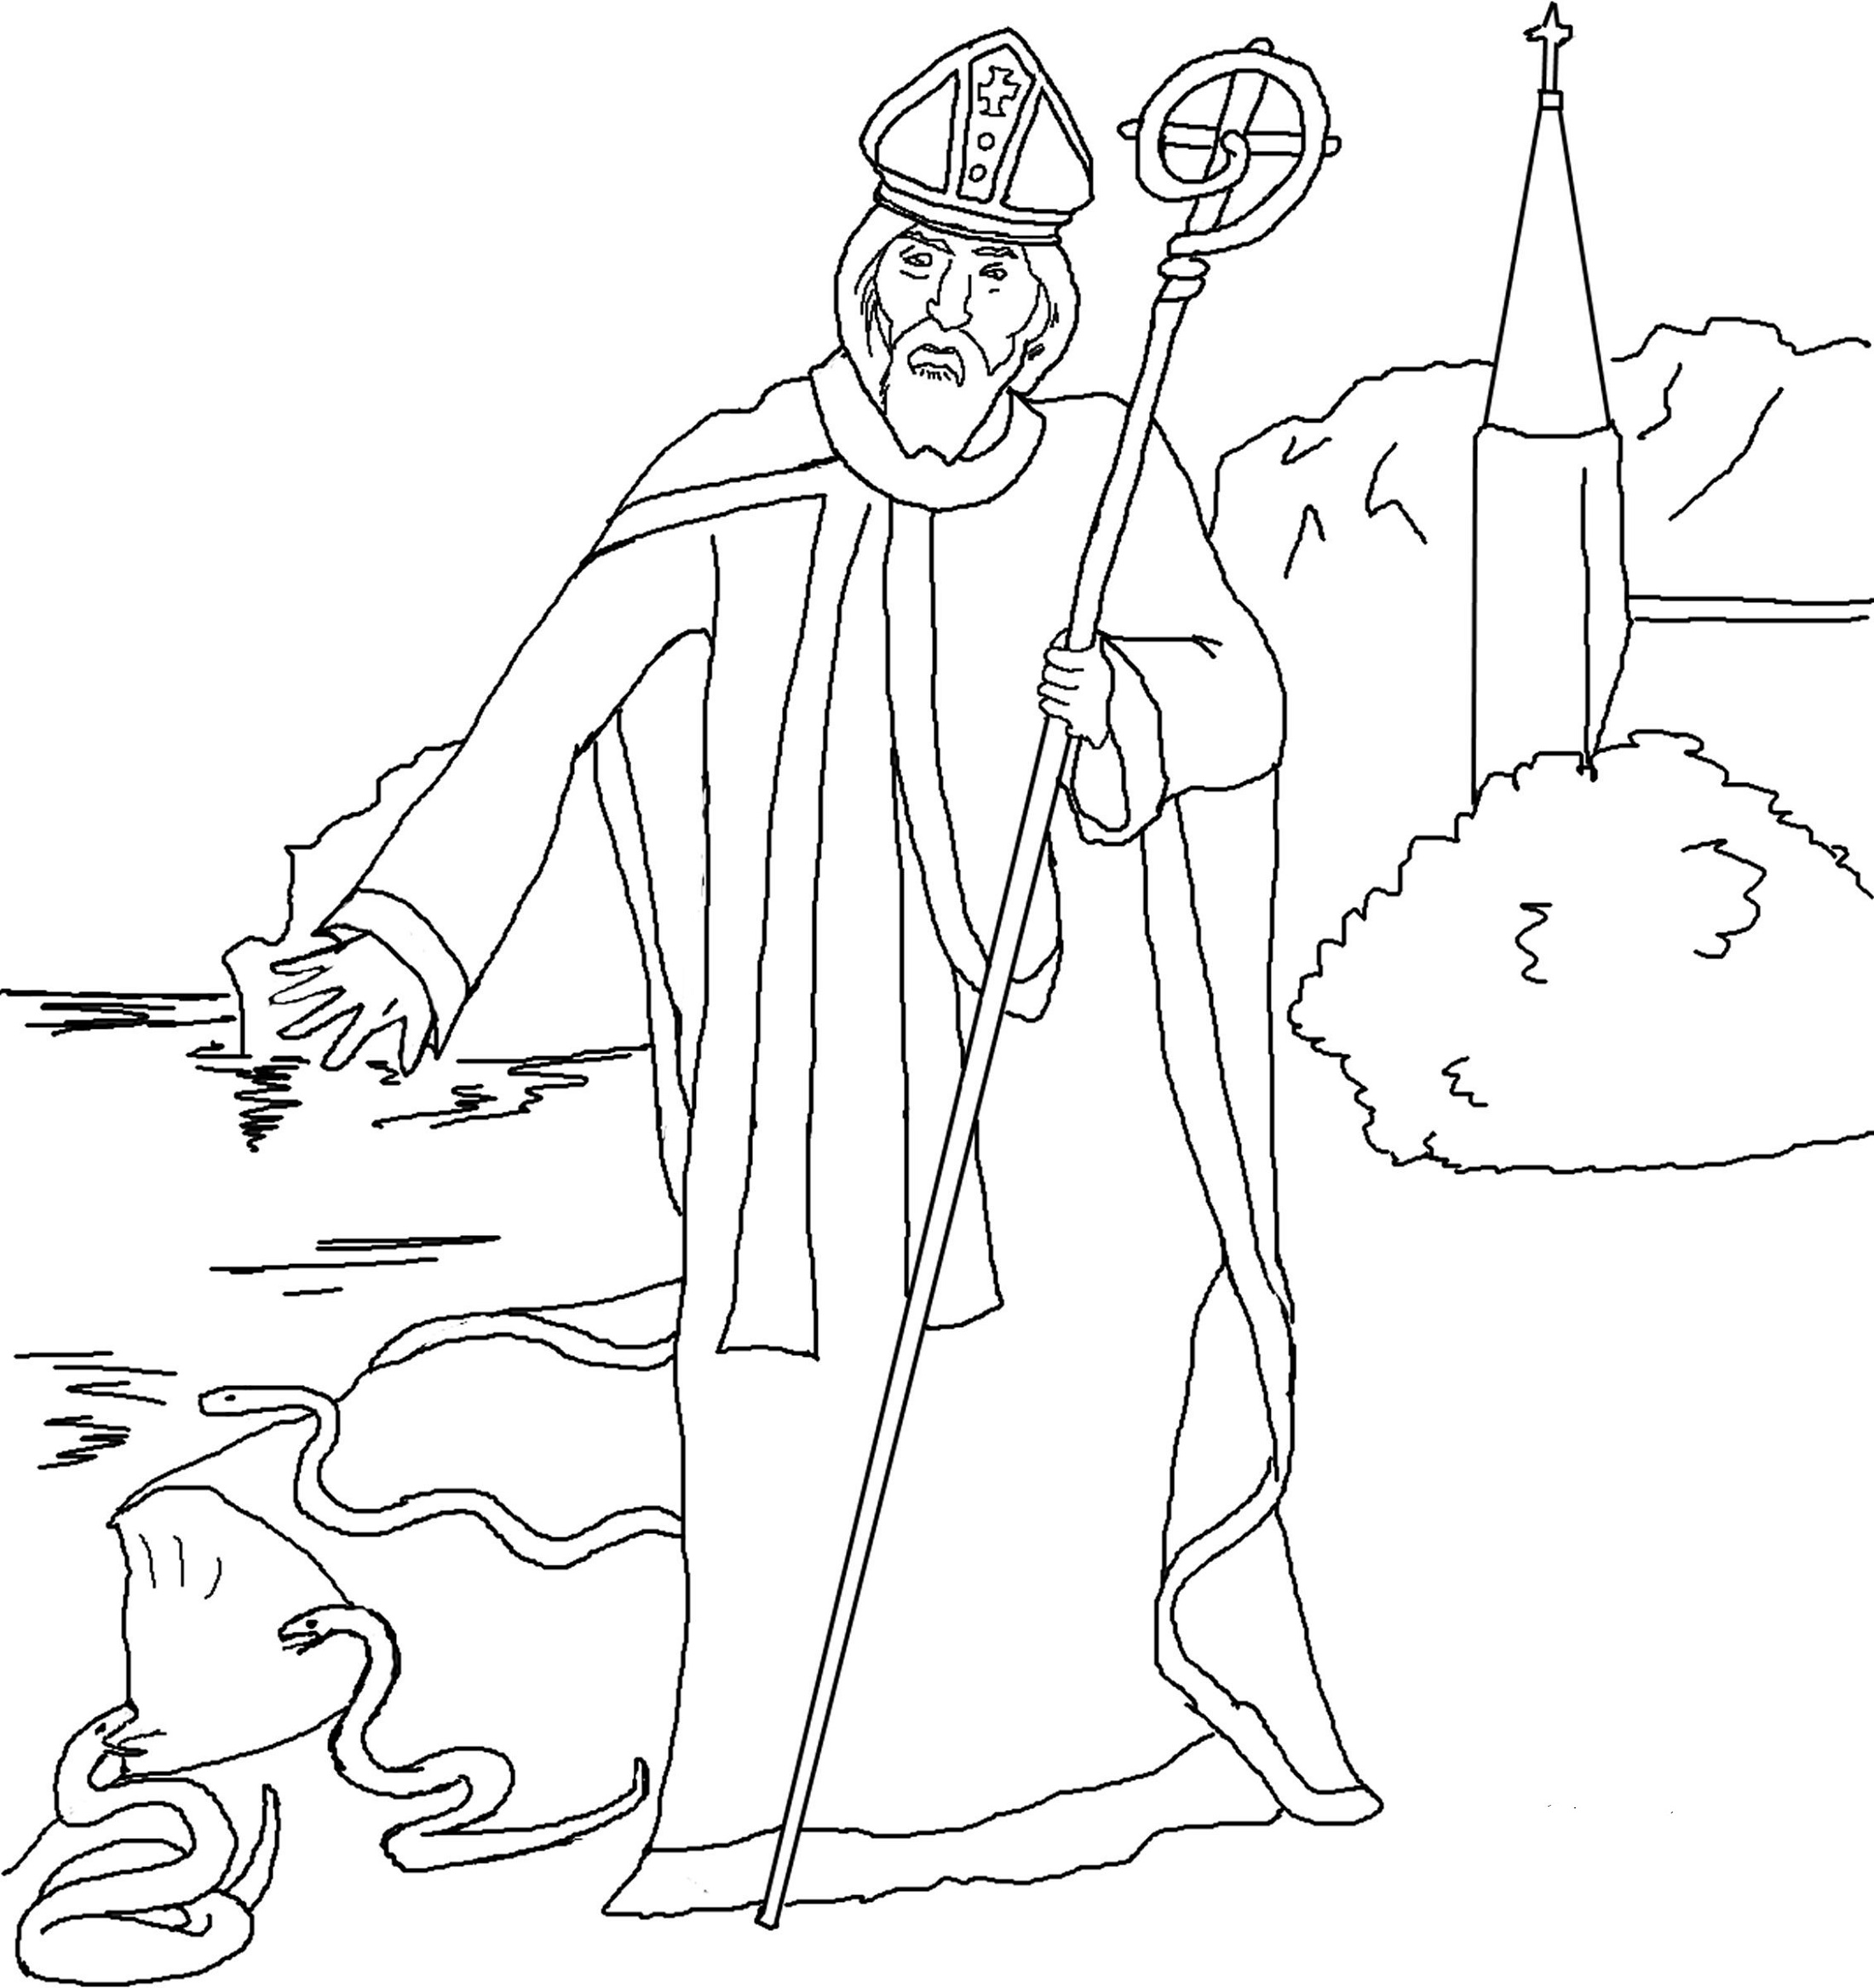 Download All Saints' Day Coloring Page | Activity Shelter